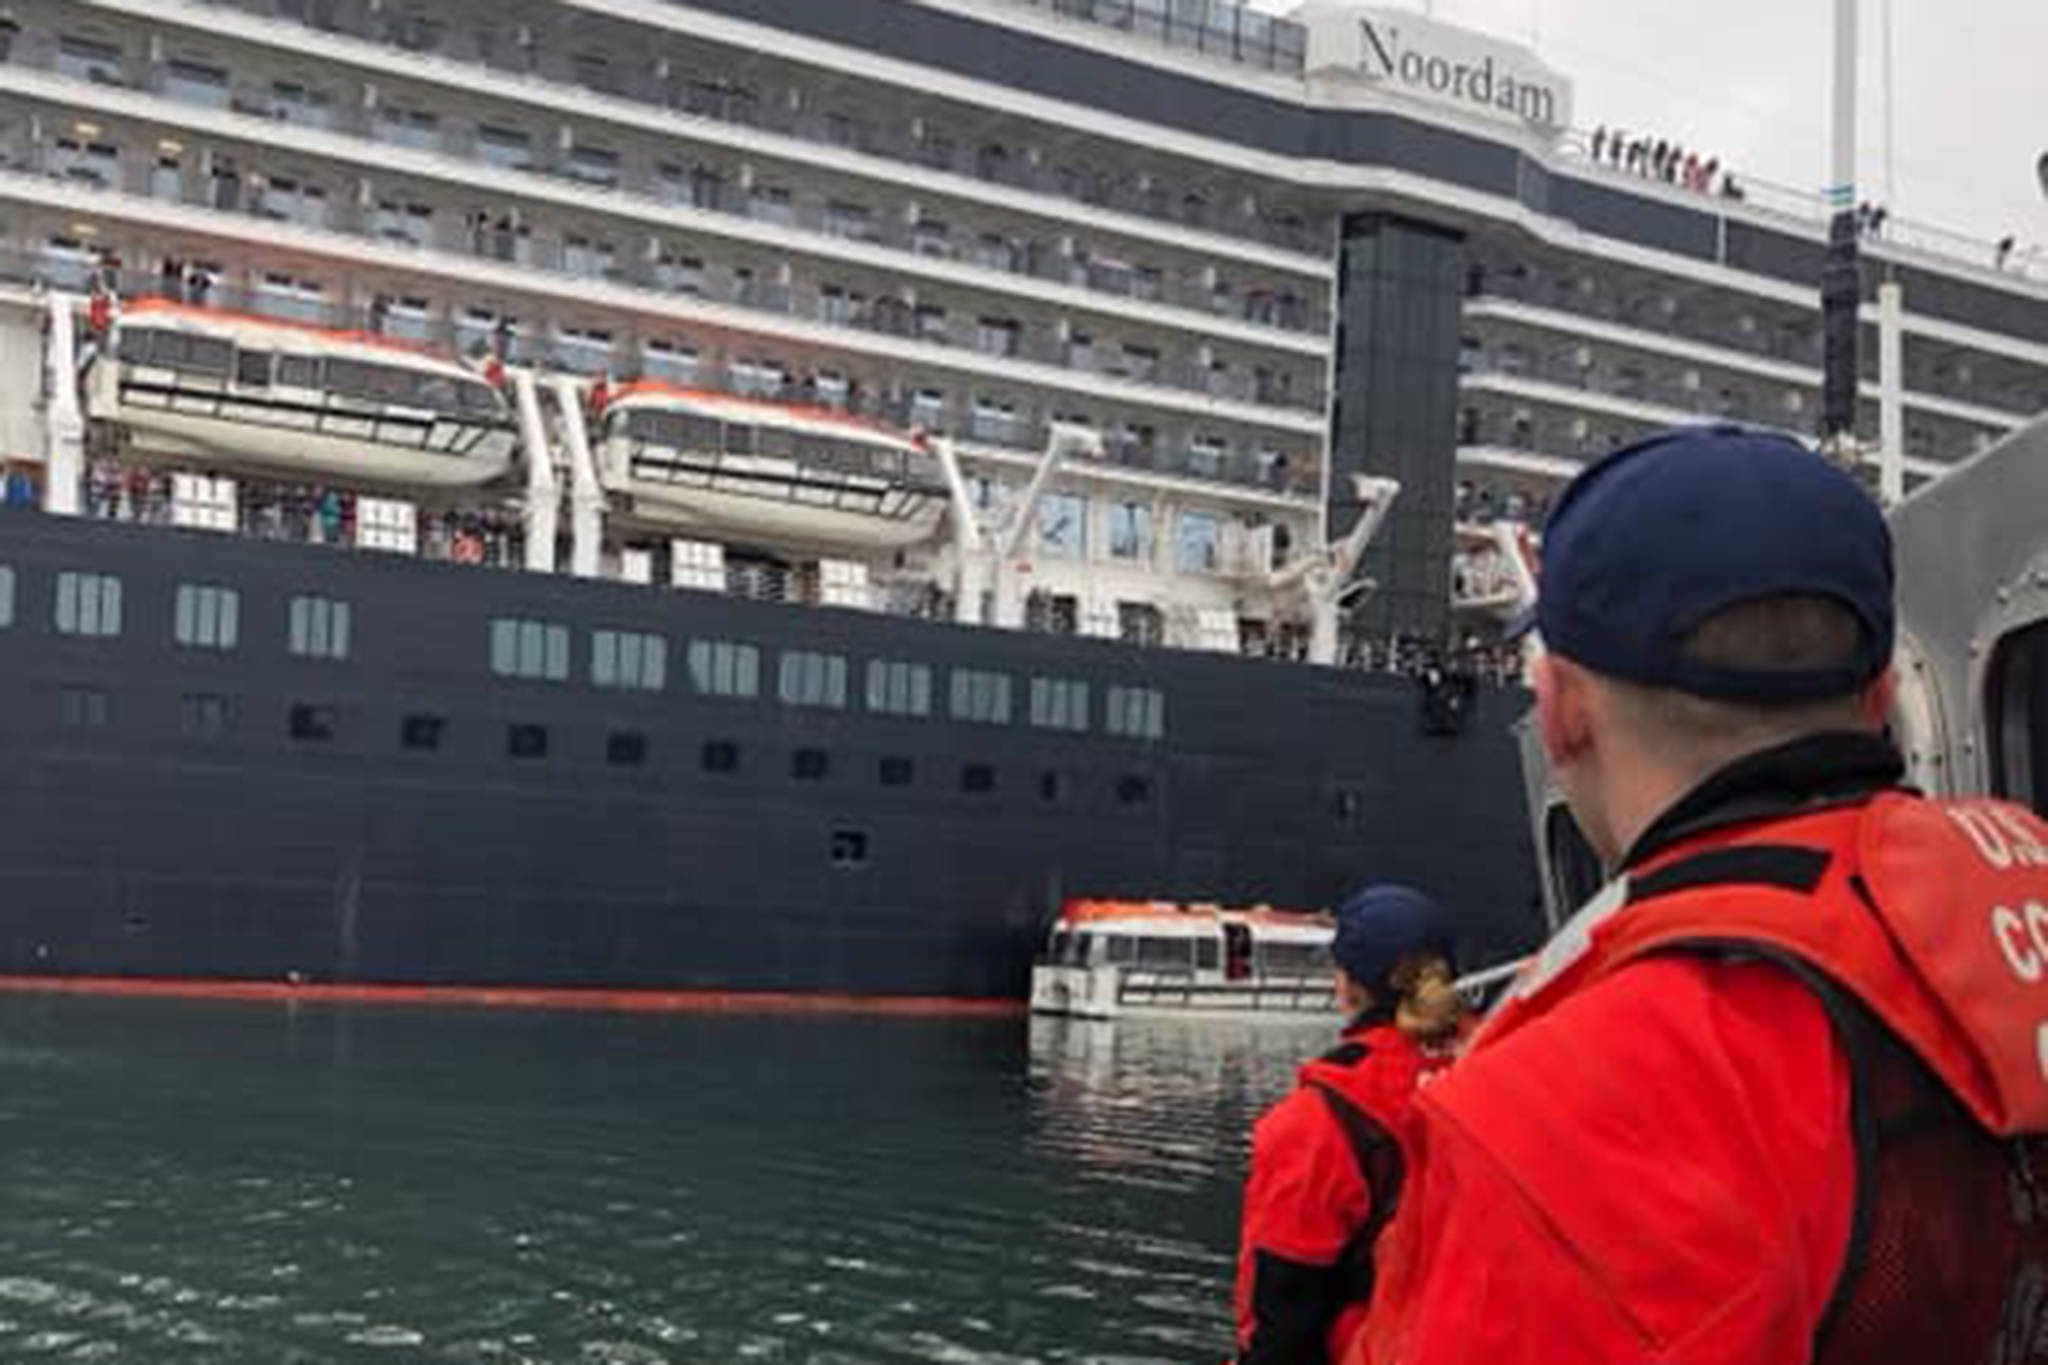 A Coast Guard and Capital City Fire/Rescue crew medevaced a 74-year-old patient from the cruise ship Noordam at the south end of Auke Bay after he displayed signs of a heart attack on Thursday, Sept. 27, 2018. (Courtesy Photo | U.S. Coast Guard)